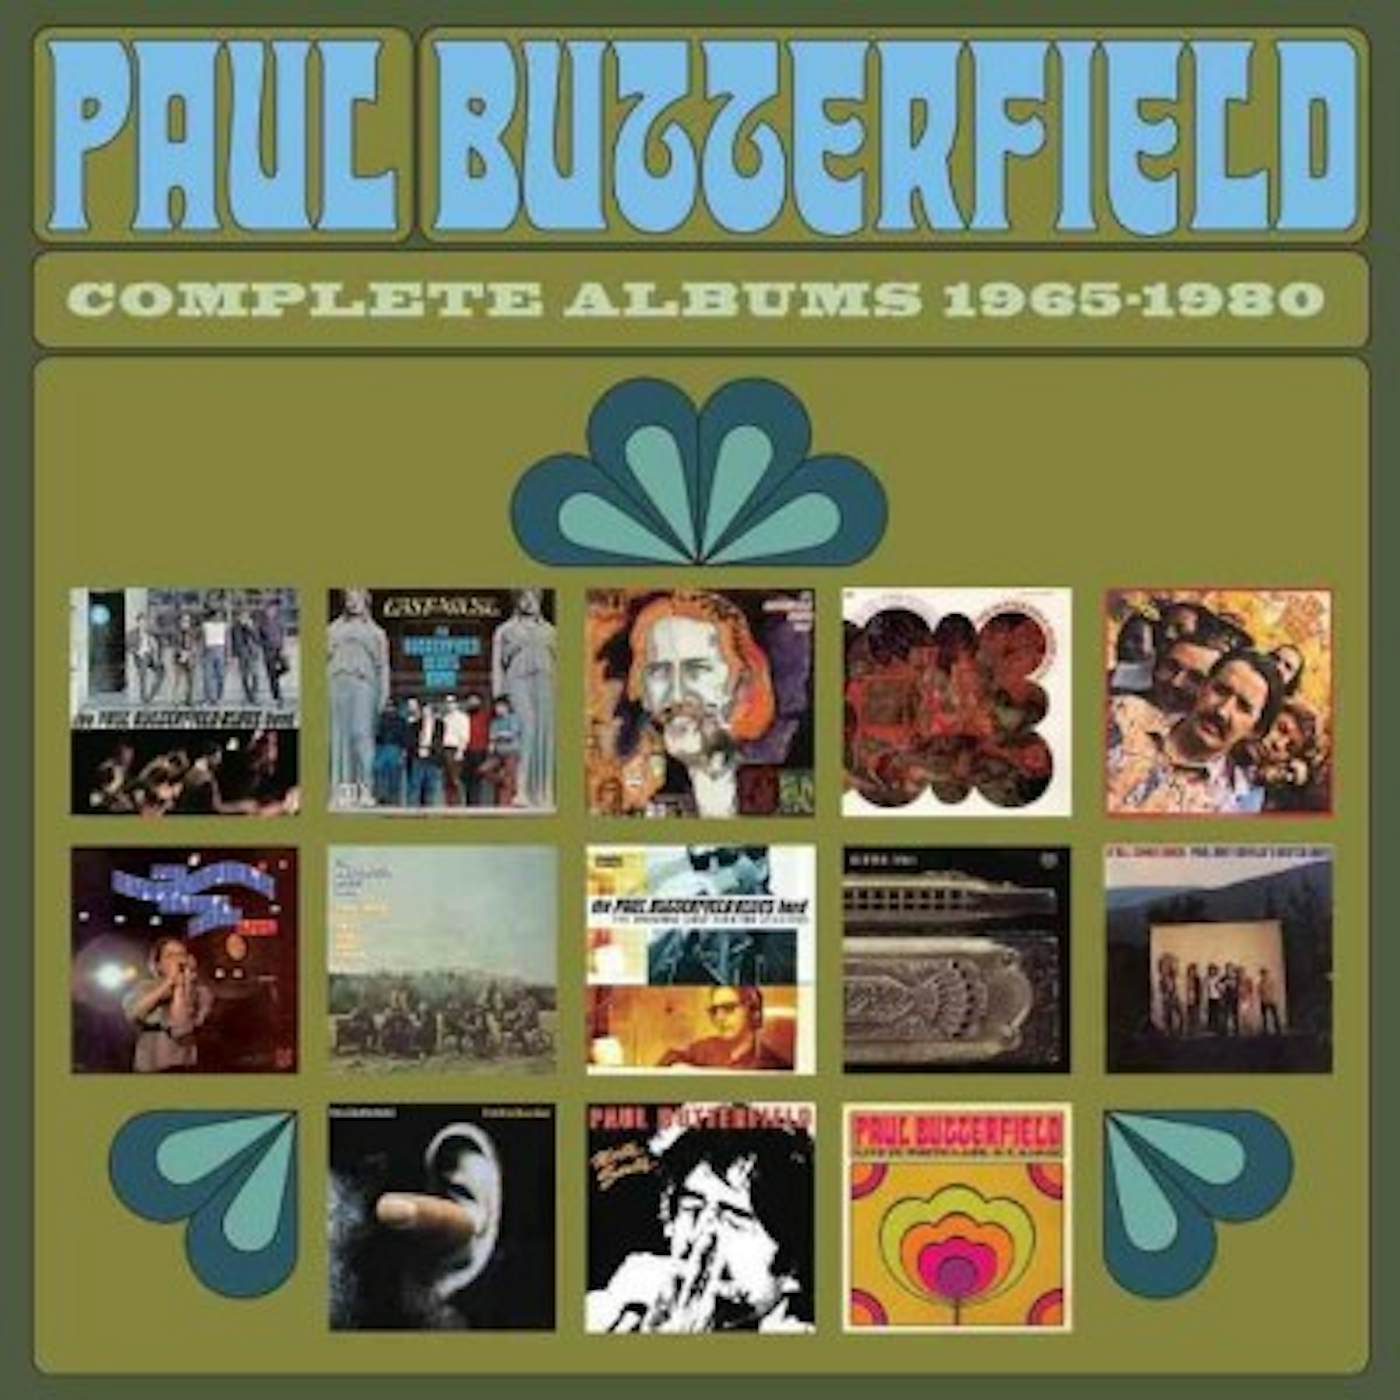 Paul Butterfield Complete Albums: 1965-1980 CD